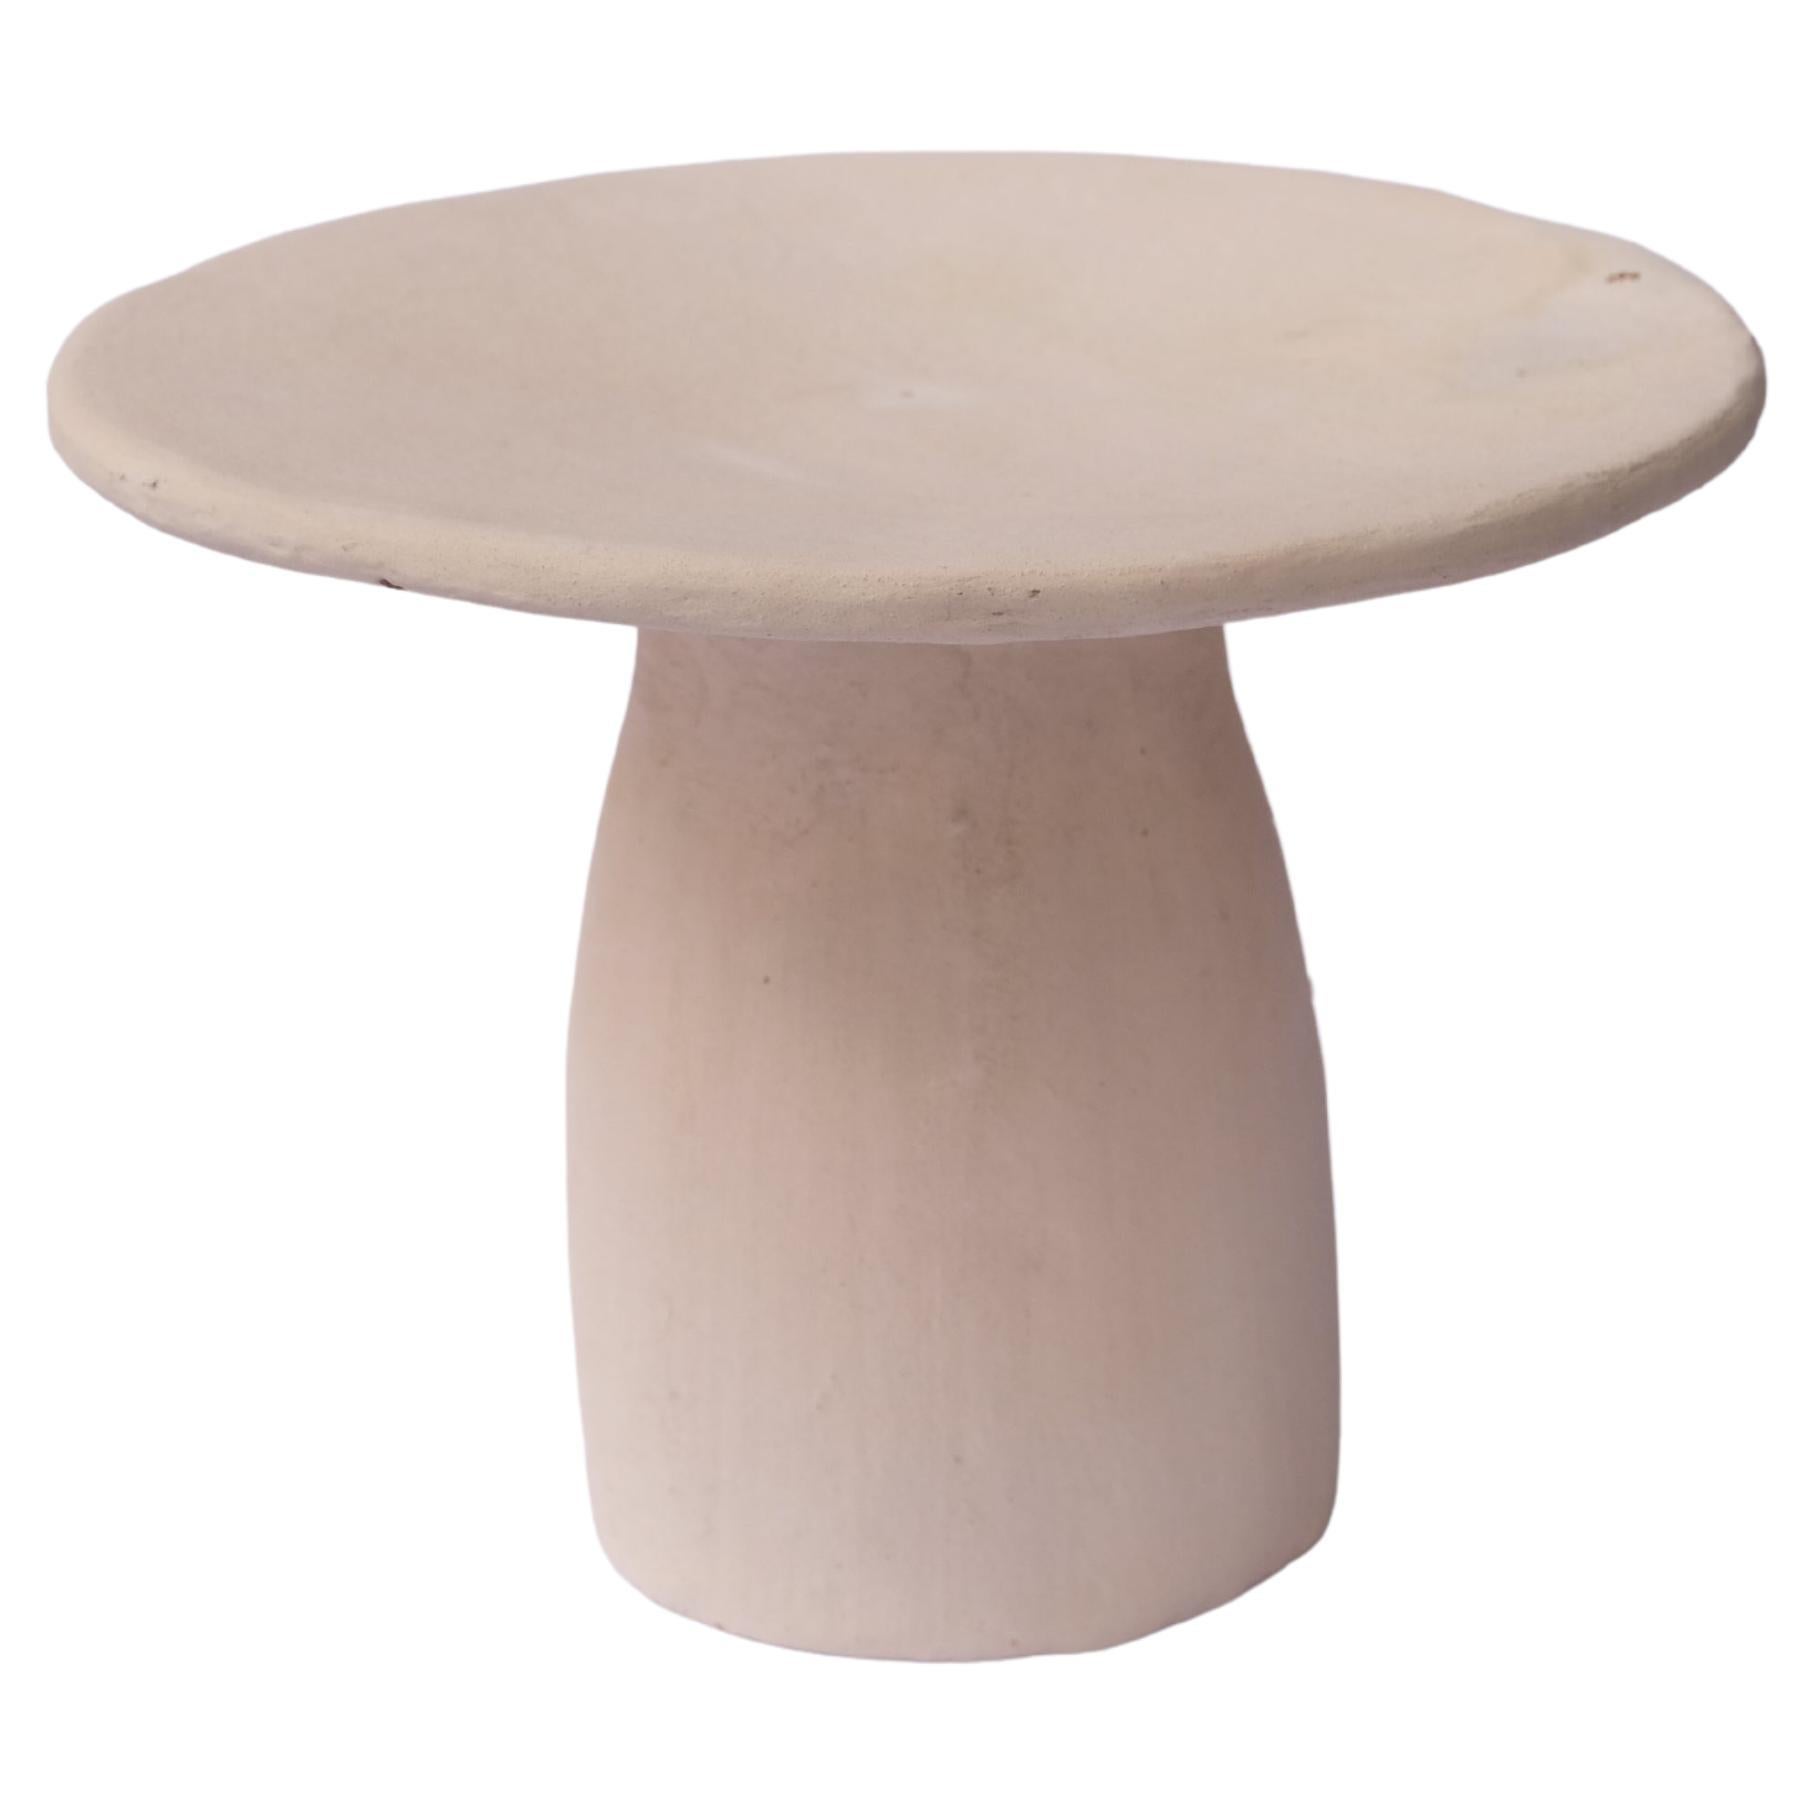 Jbel Zucar White Small Side Table Made of Clay, Handcrafted by the Potter Houda